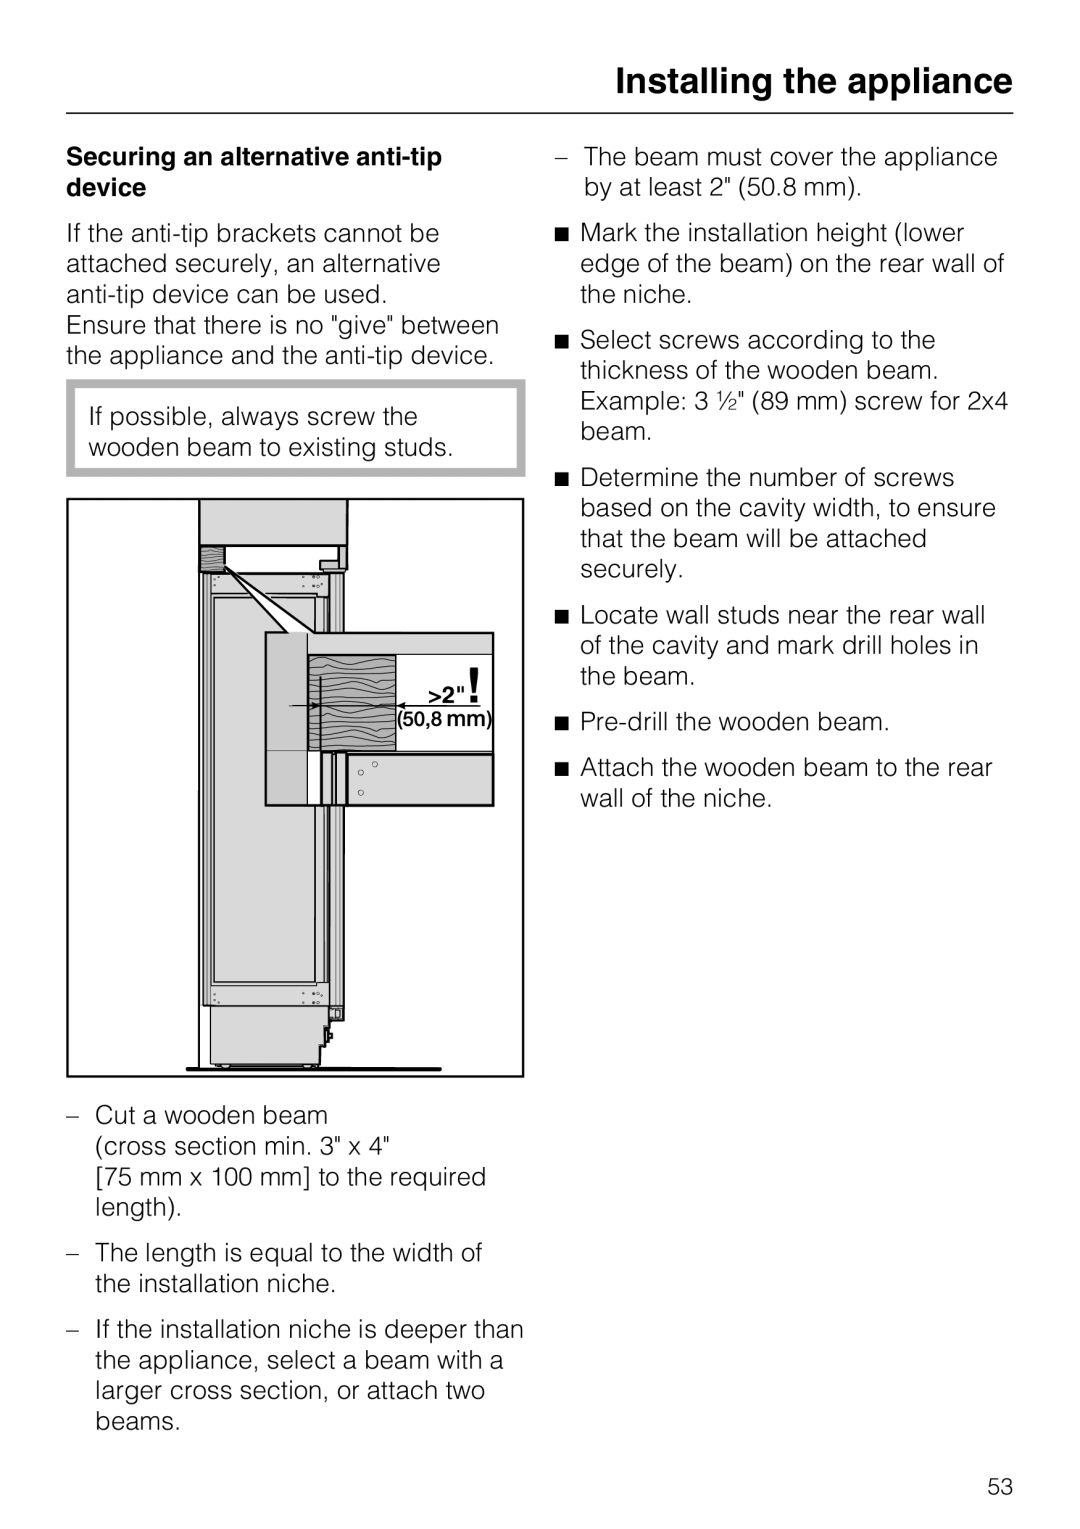 Miele 09 920 570 installation instructions Installing the appliance, Securing an alternative anti-tipdevice 